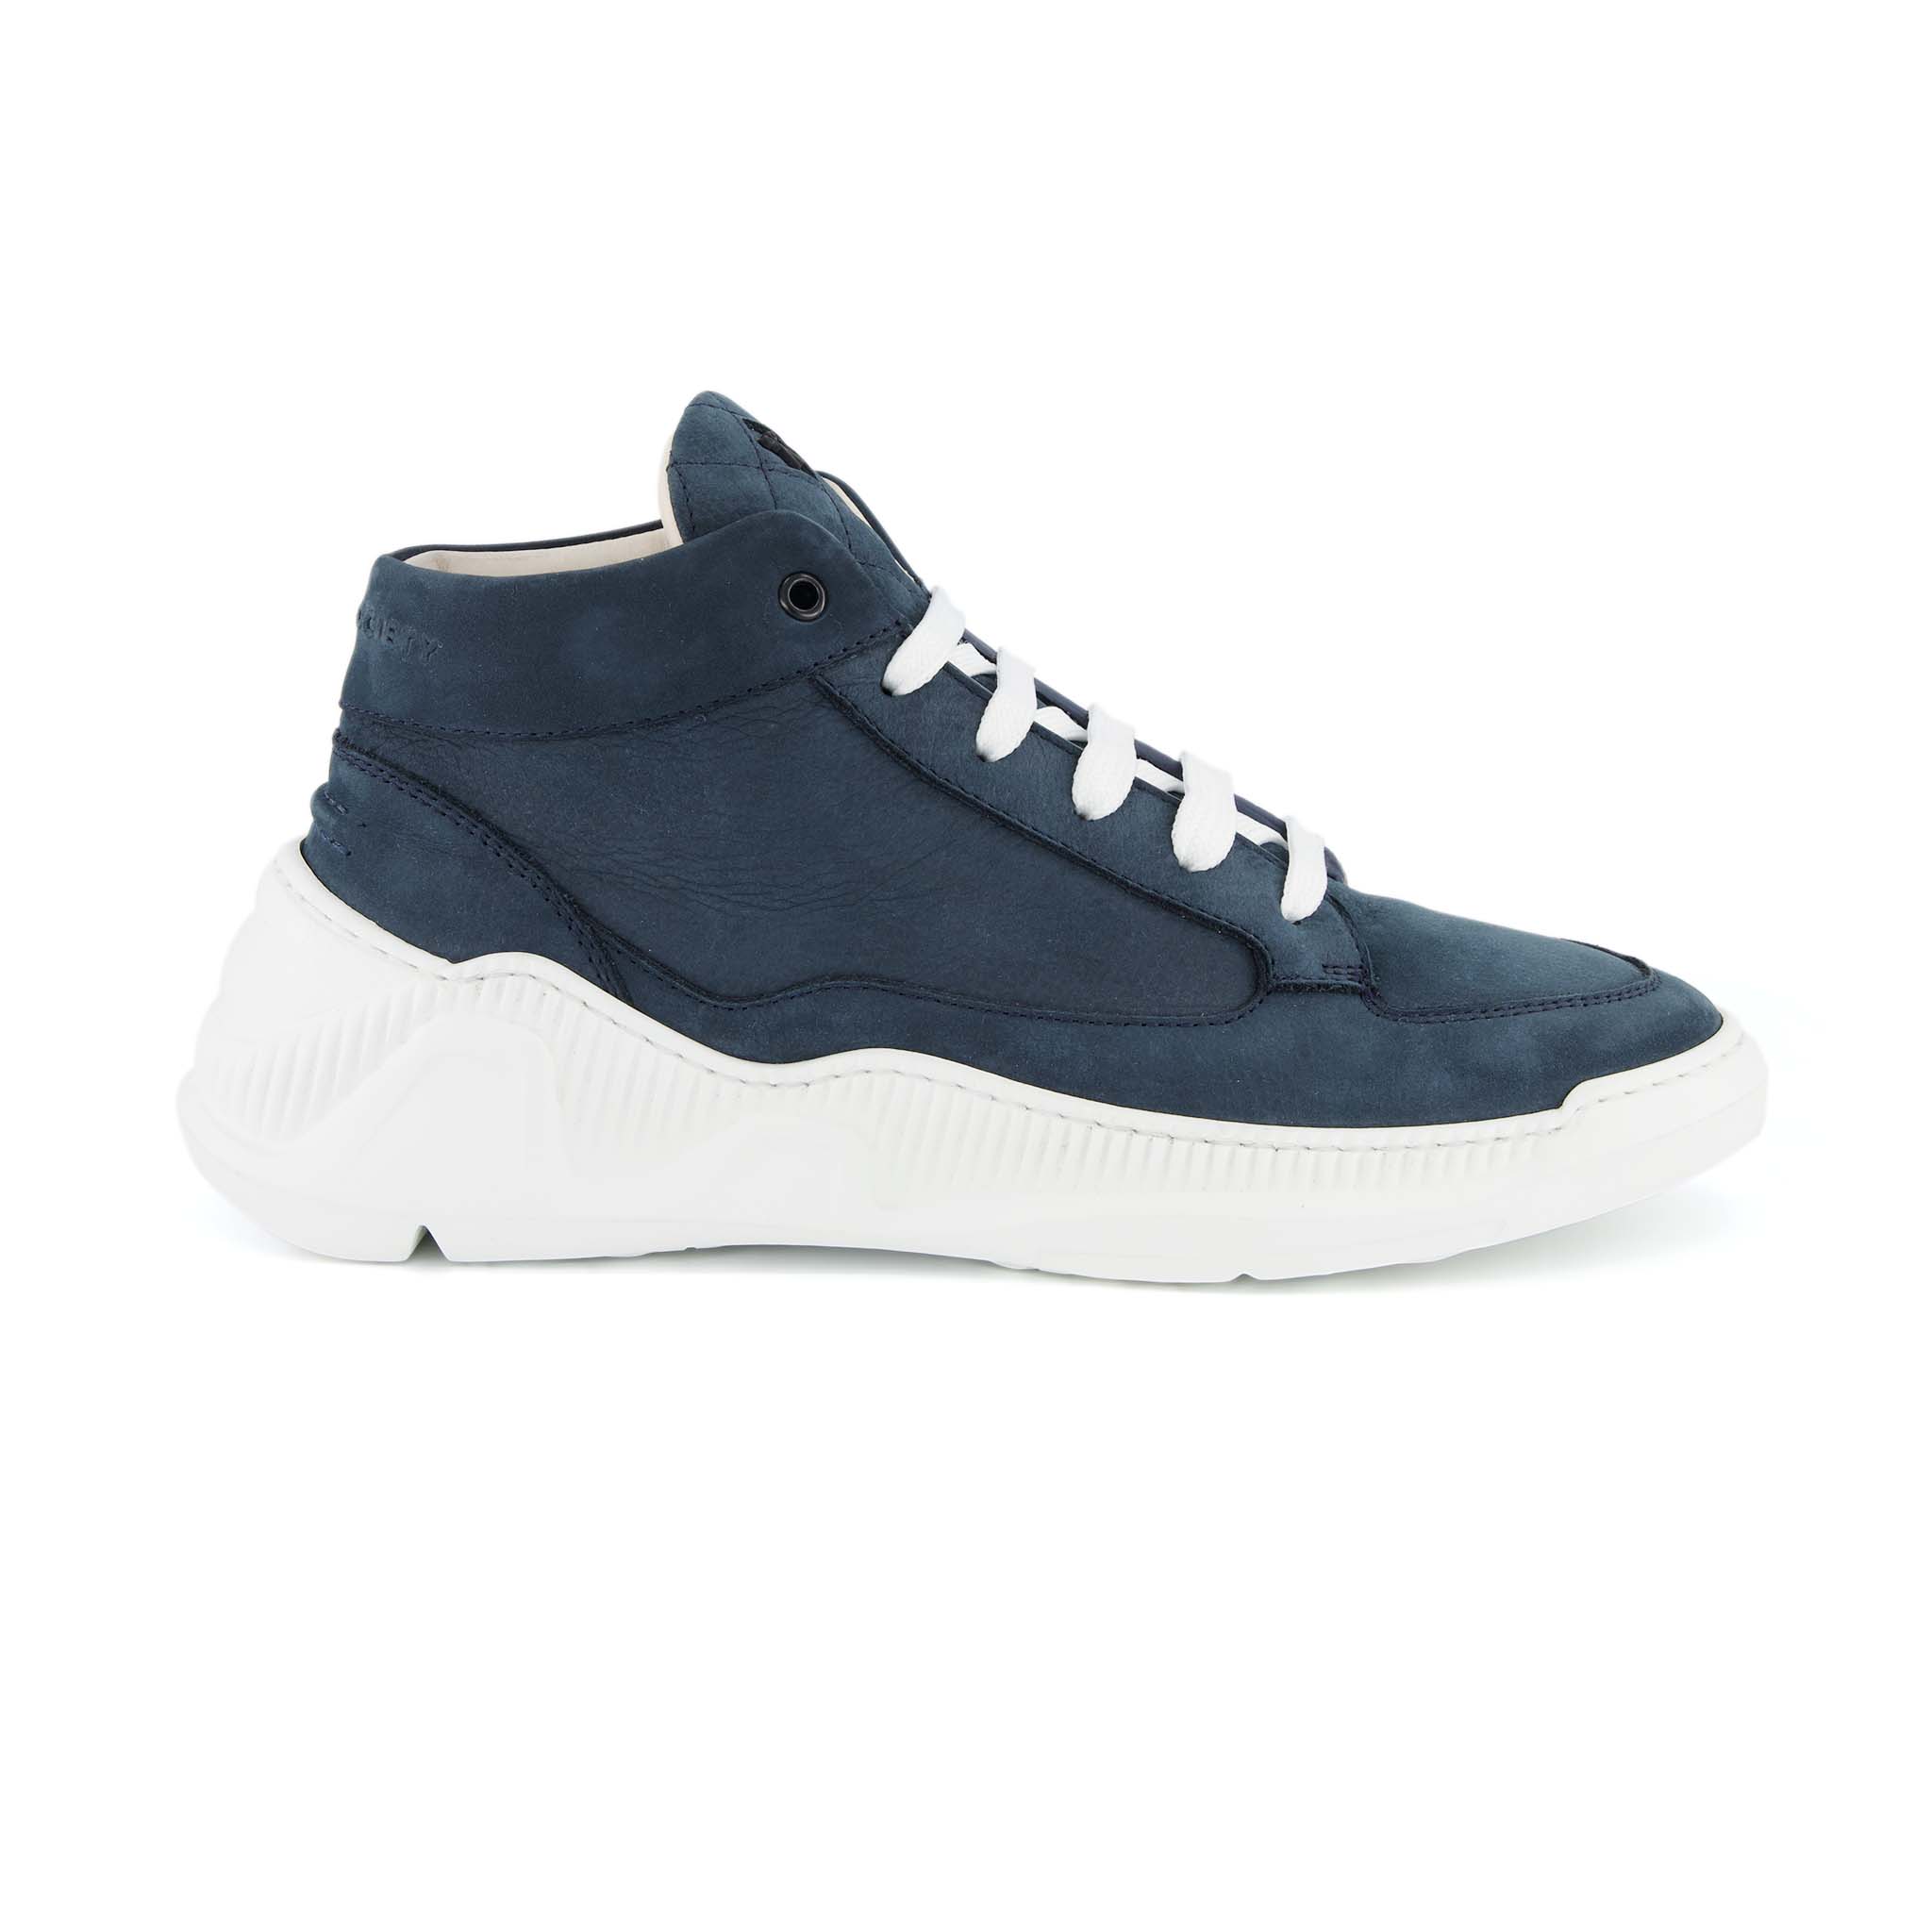 Dante Mid Top Sneaker | Navy Nubuck Italian Leather | White Outsole | Made in Italy